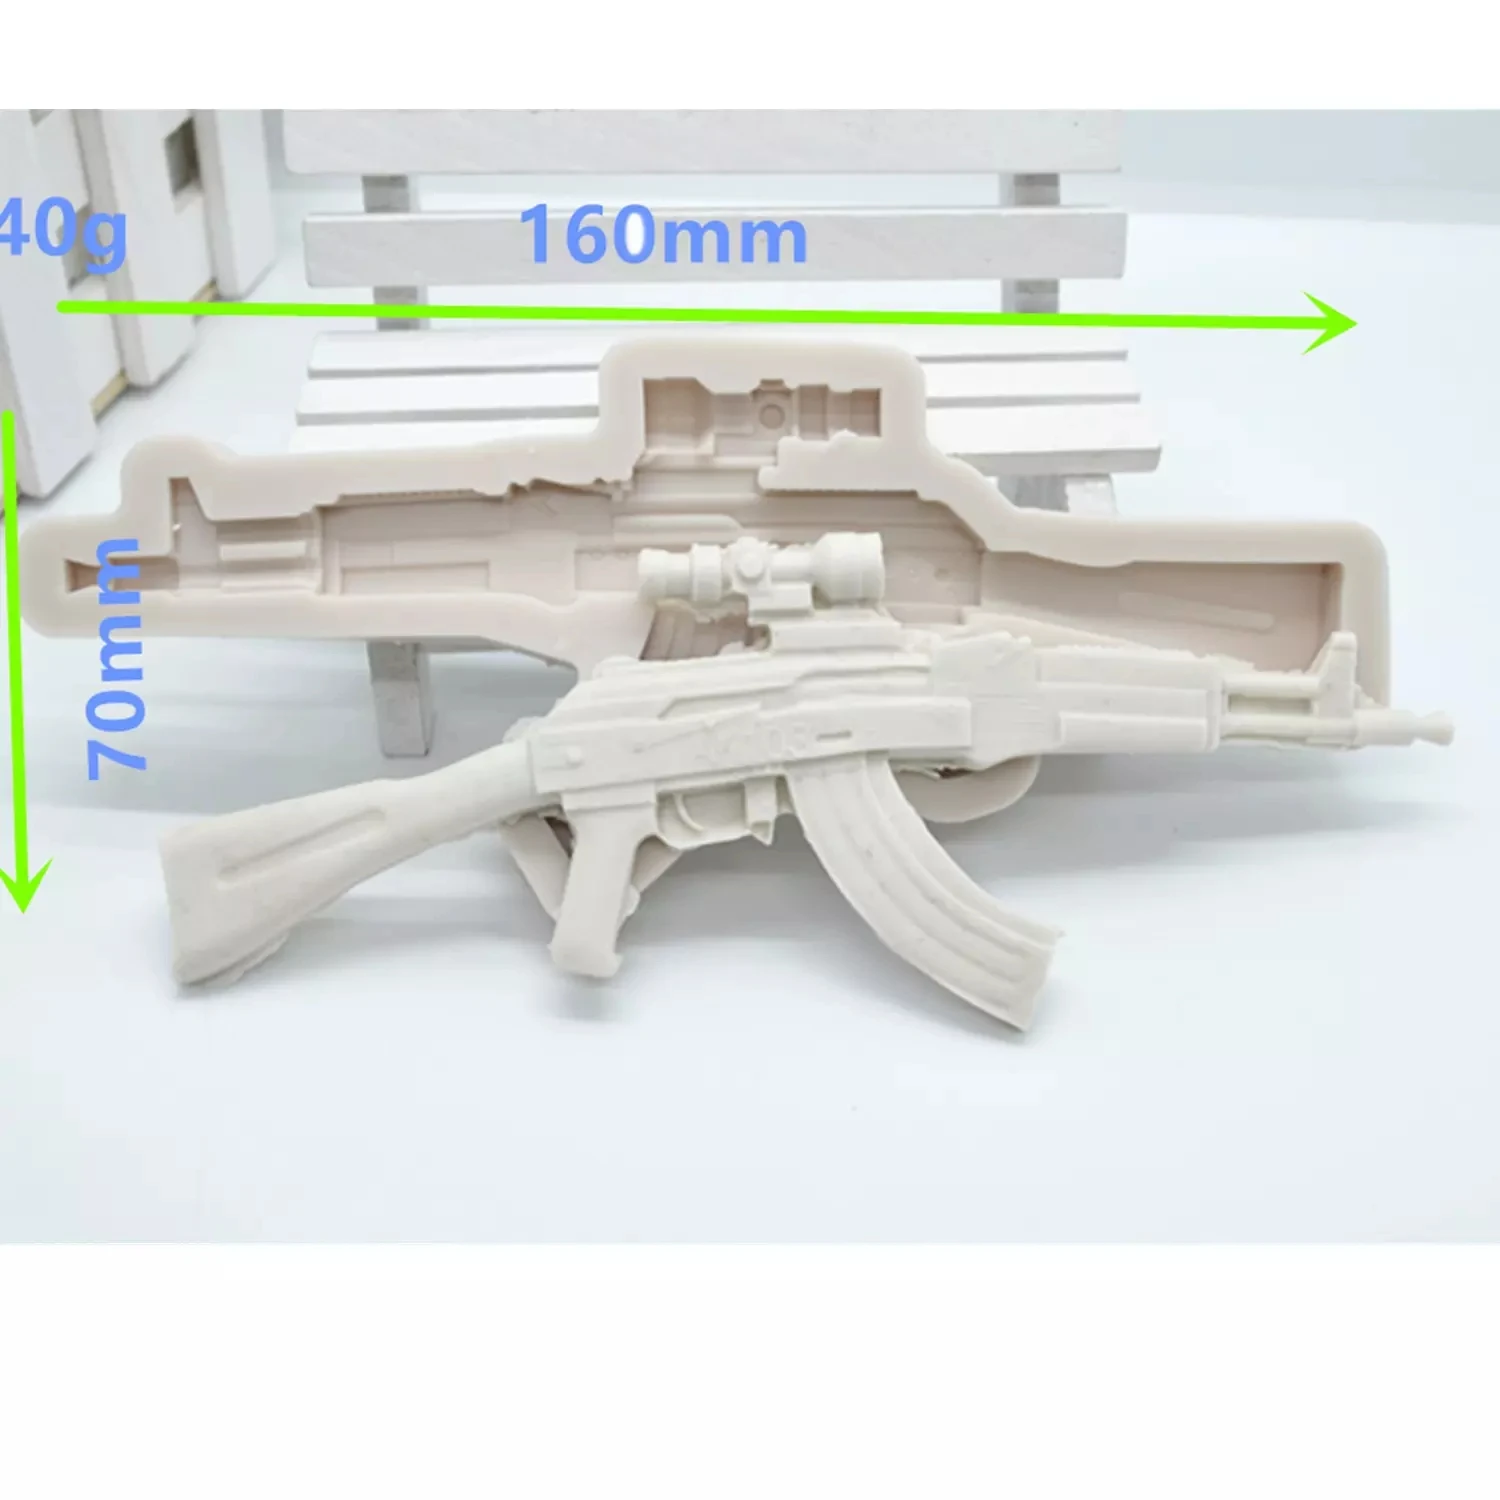 

3D MA41 Gun Shape Fondant Resin Silicone Mold for DIY Pastry Cupcake Cake Dessert Plaster Lace Decoration Baking Tool Kitchen